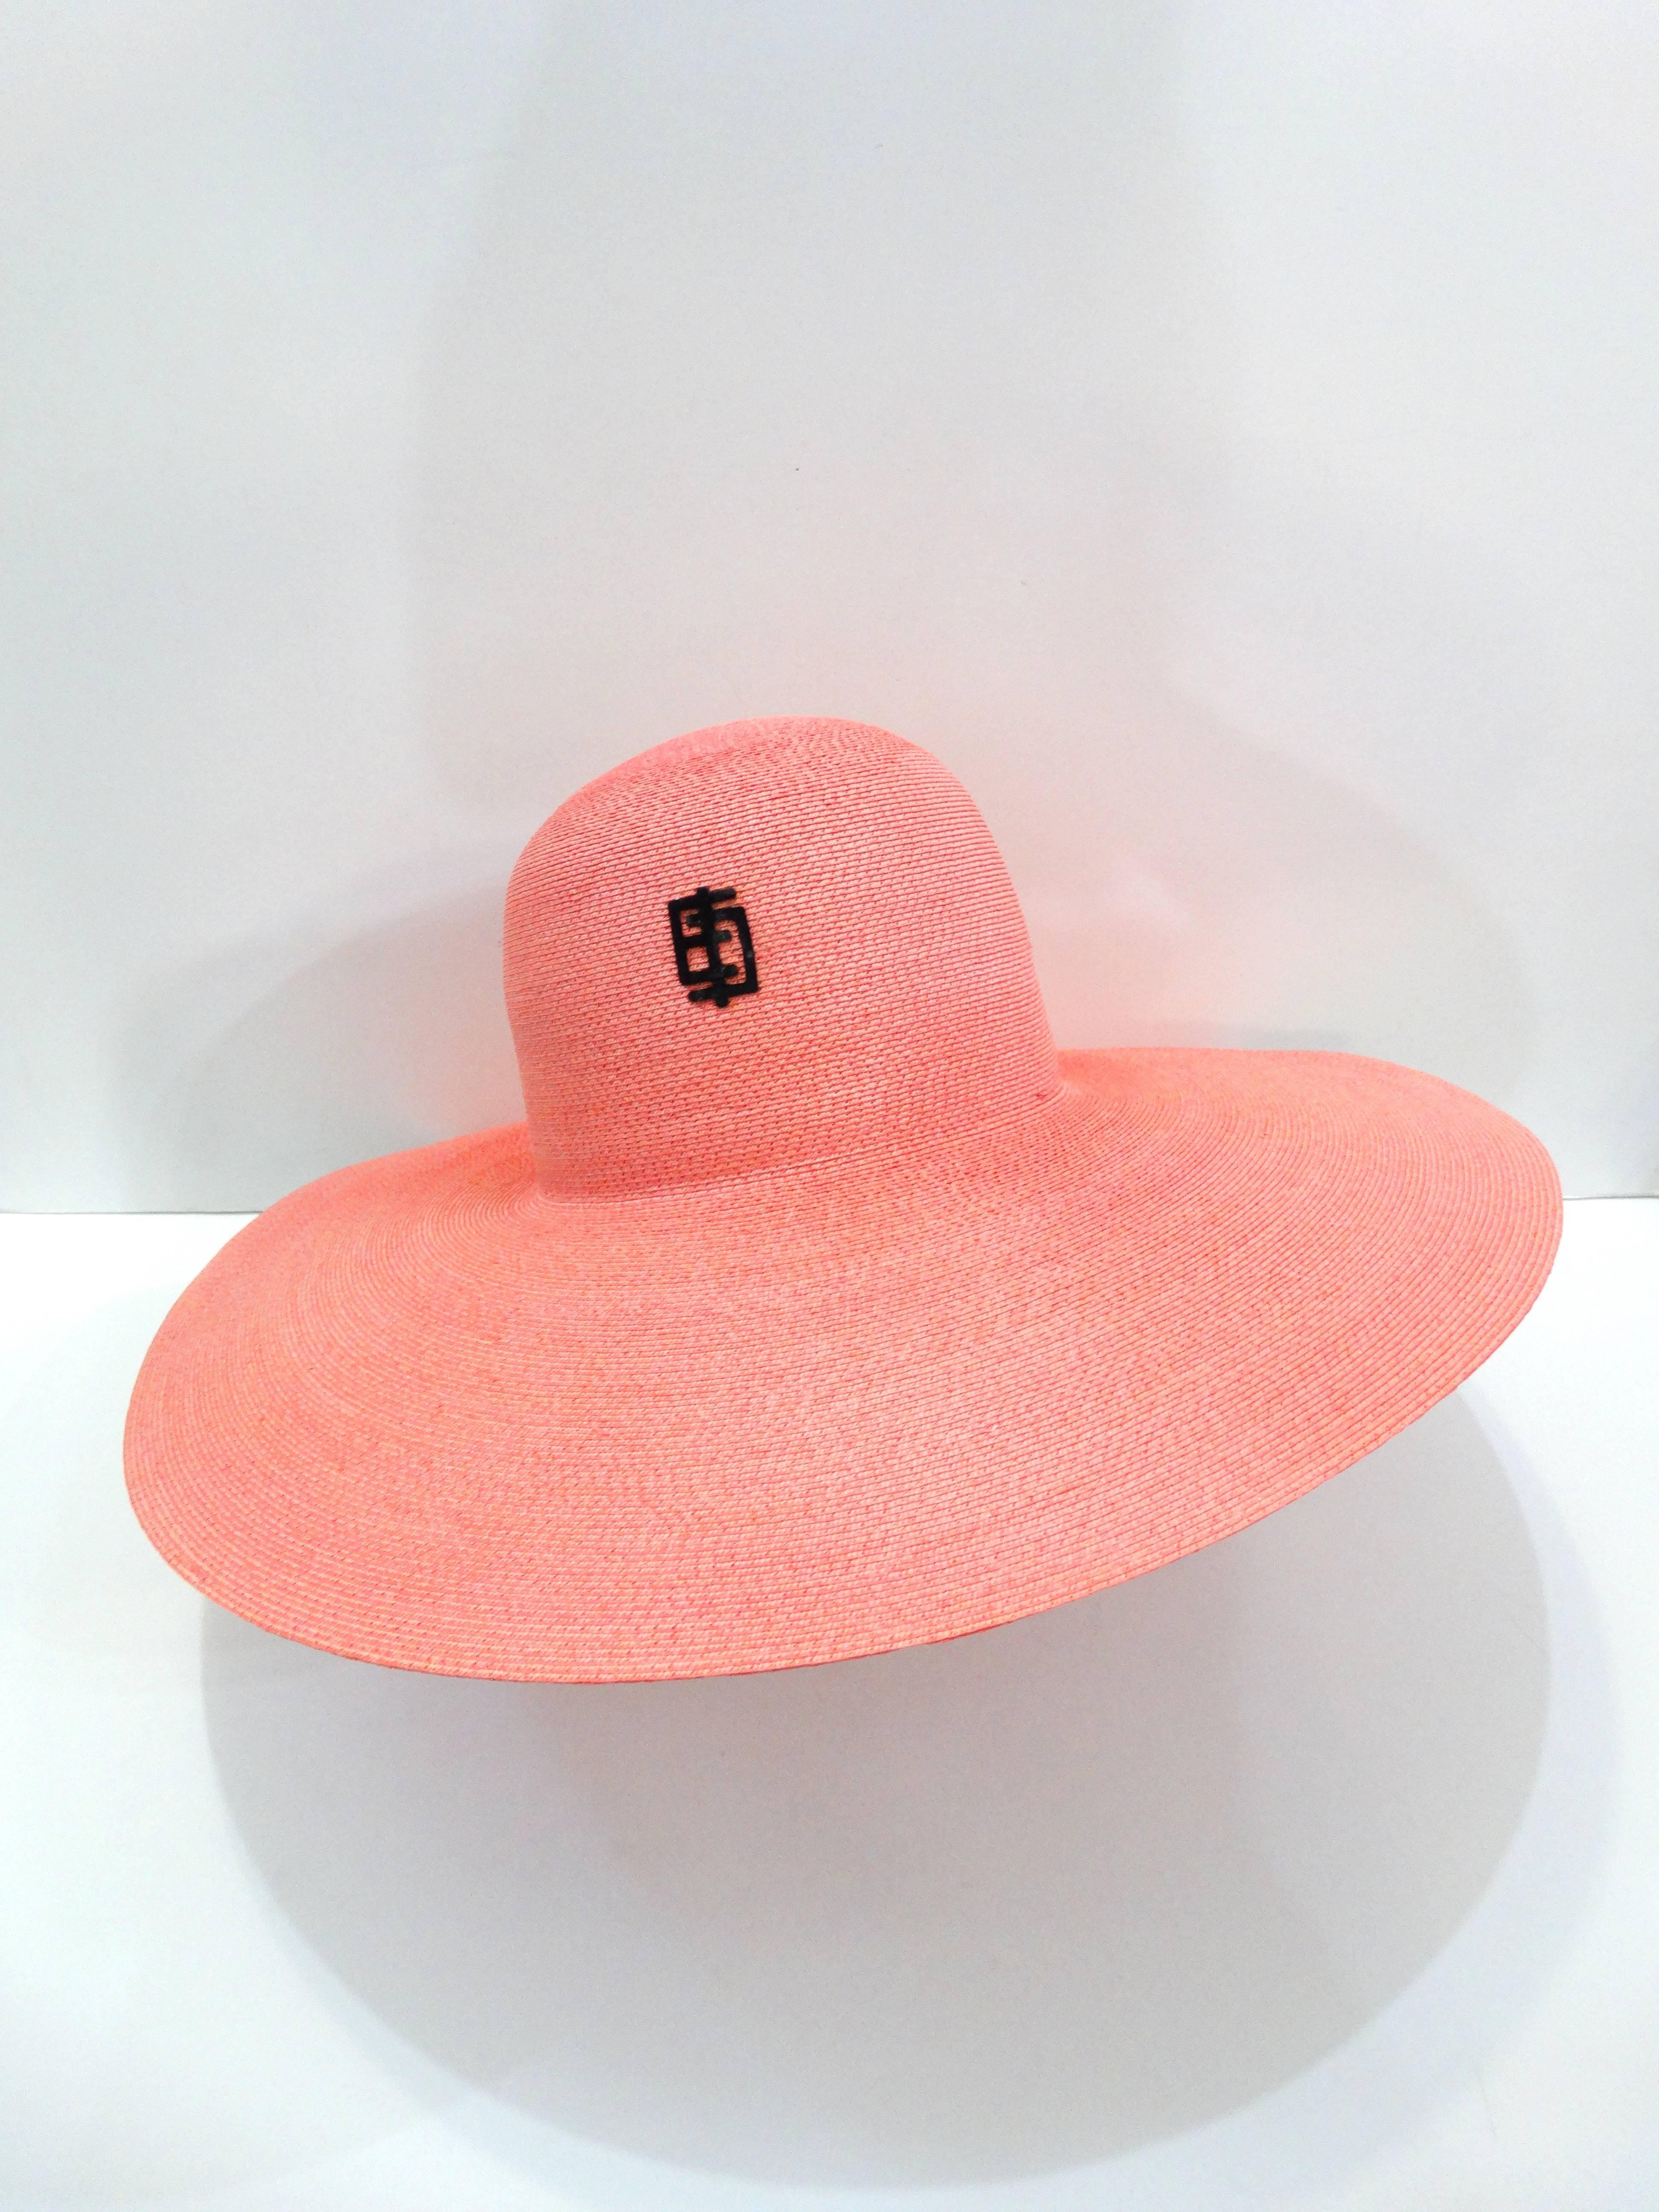 Shield yourself from the sun in style in our 1960s Emilio Pucci sunhat! Made of a quality woven straw dyed in a sunset pink color. Trendy super wide brim frames the face flawlessly- the perfect hat for a beach-y hair moment! Embellished with